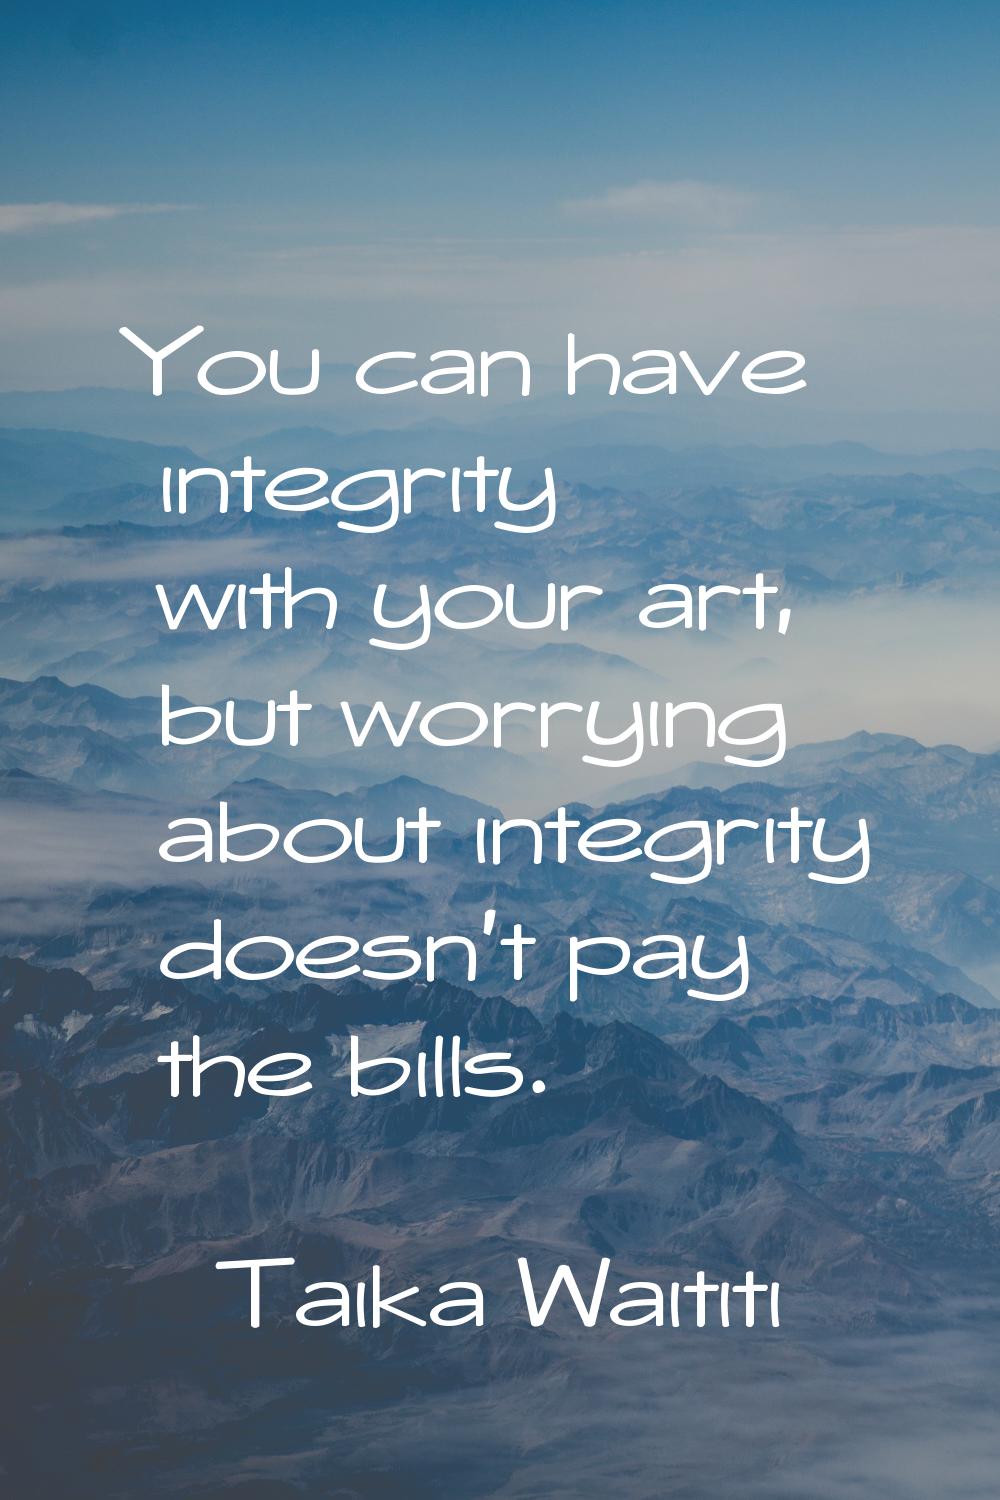 You can have integrity with your art, but worrying about integrity doesn't pay the bills.